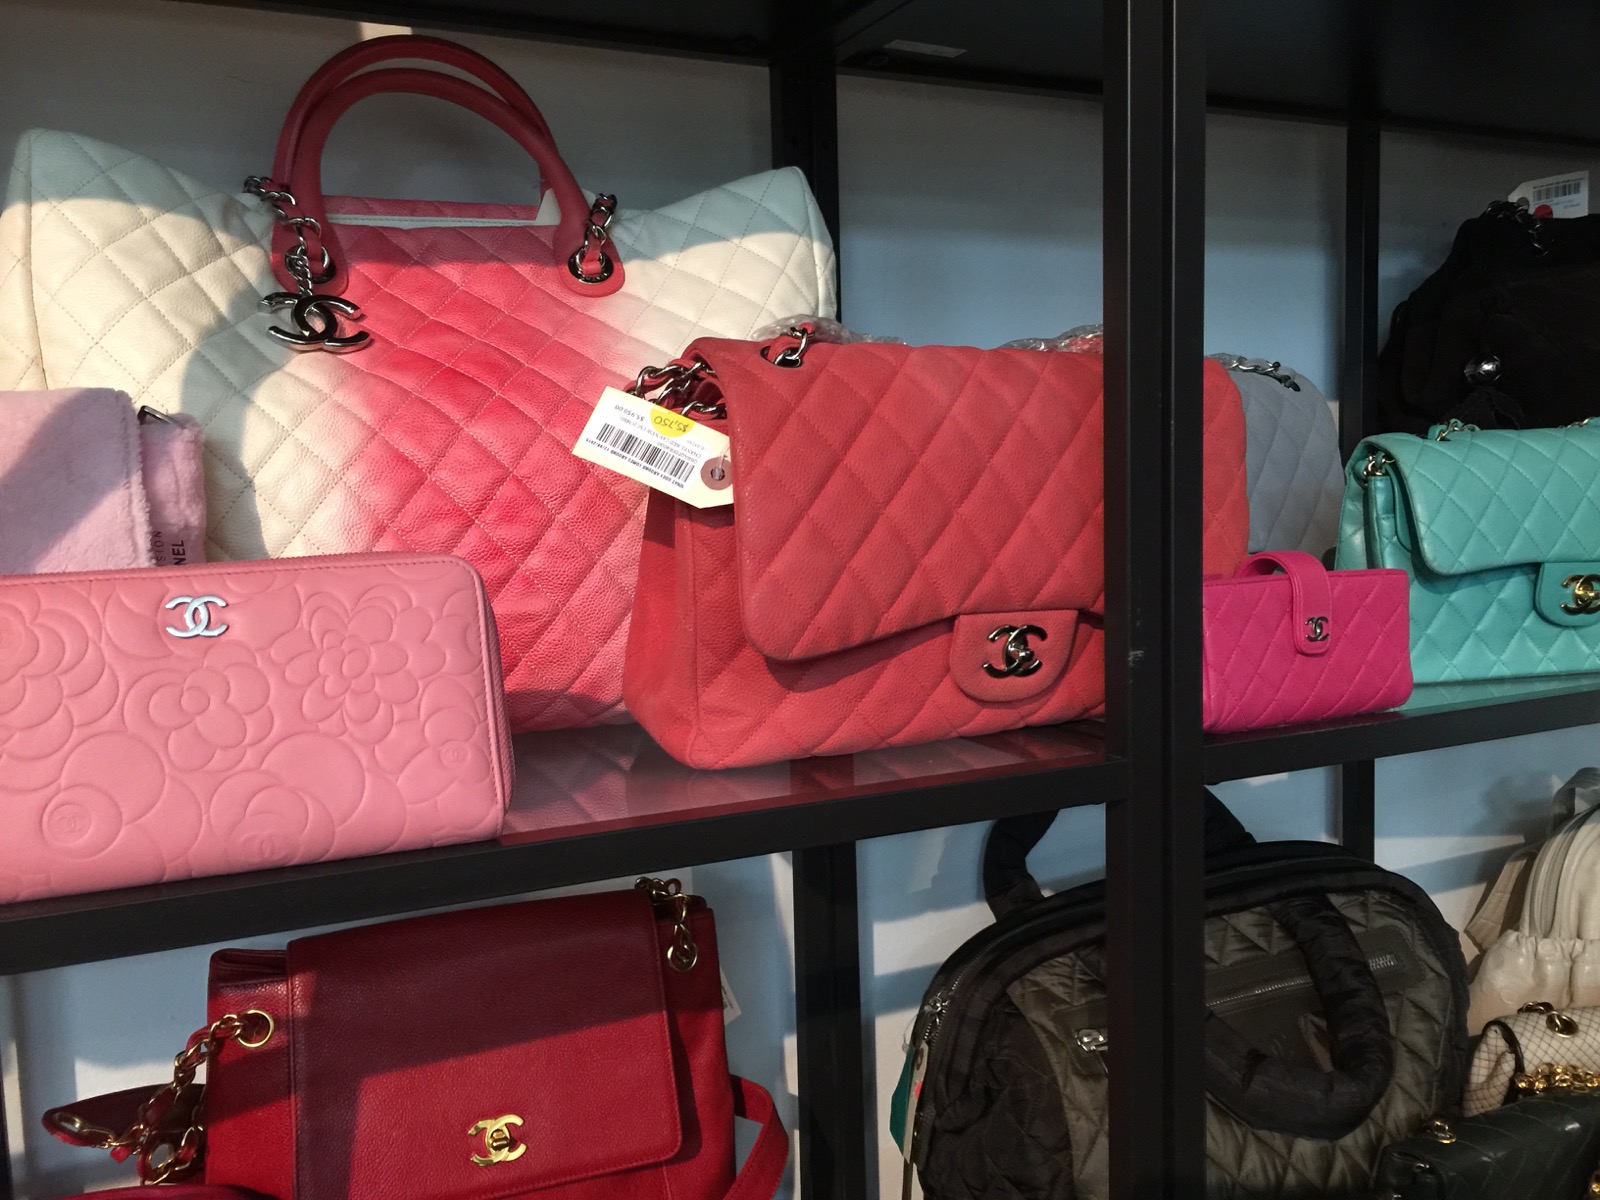 Chanel Overload At What Goes Around Comes Around Sample Sale - Practically  Haute